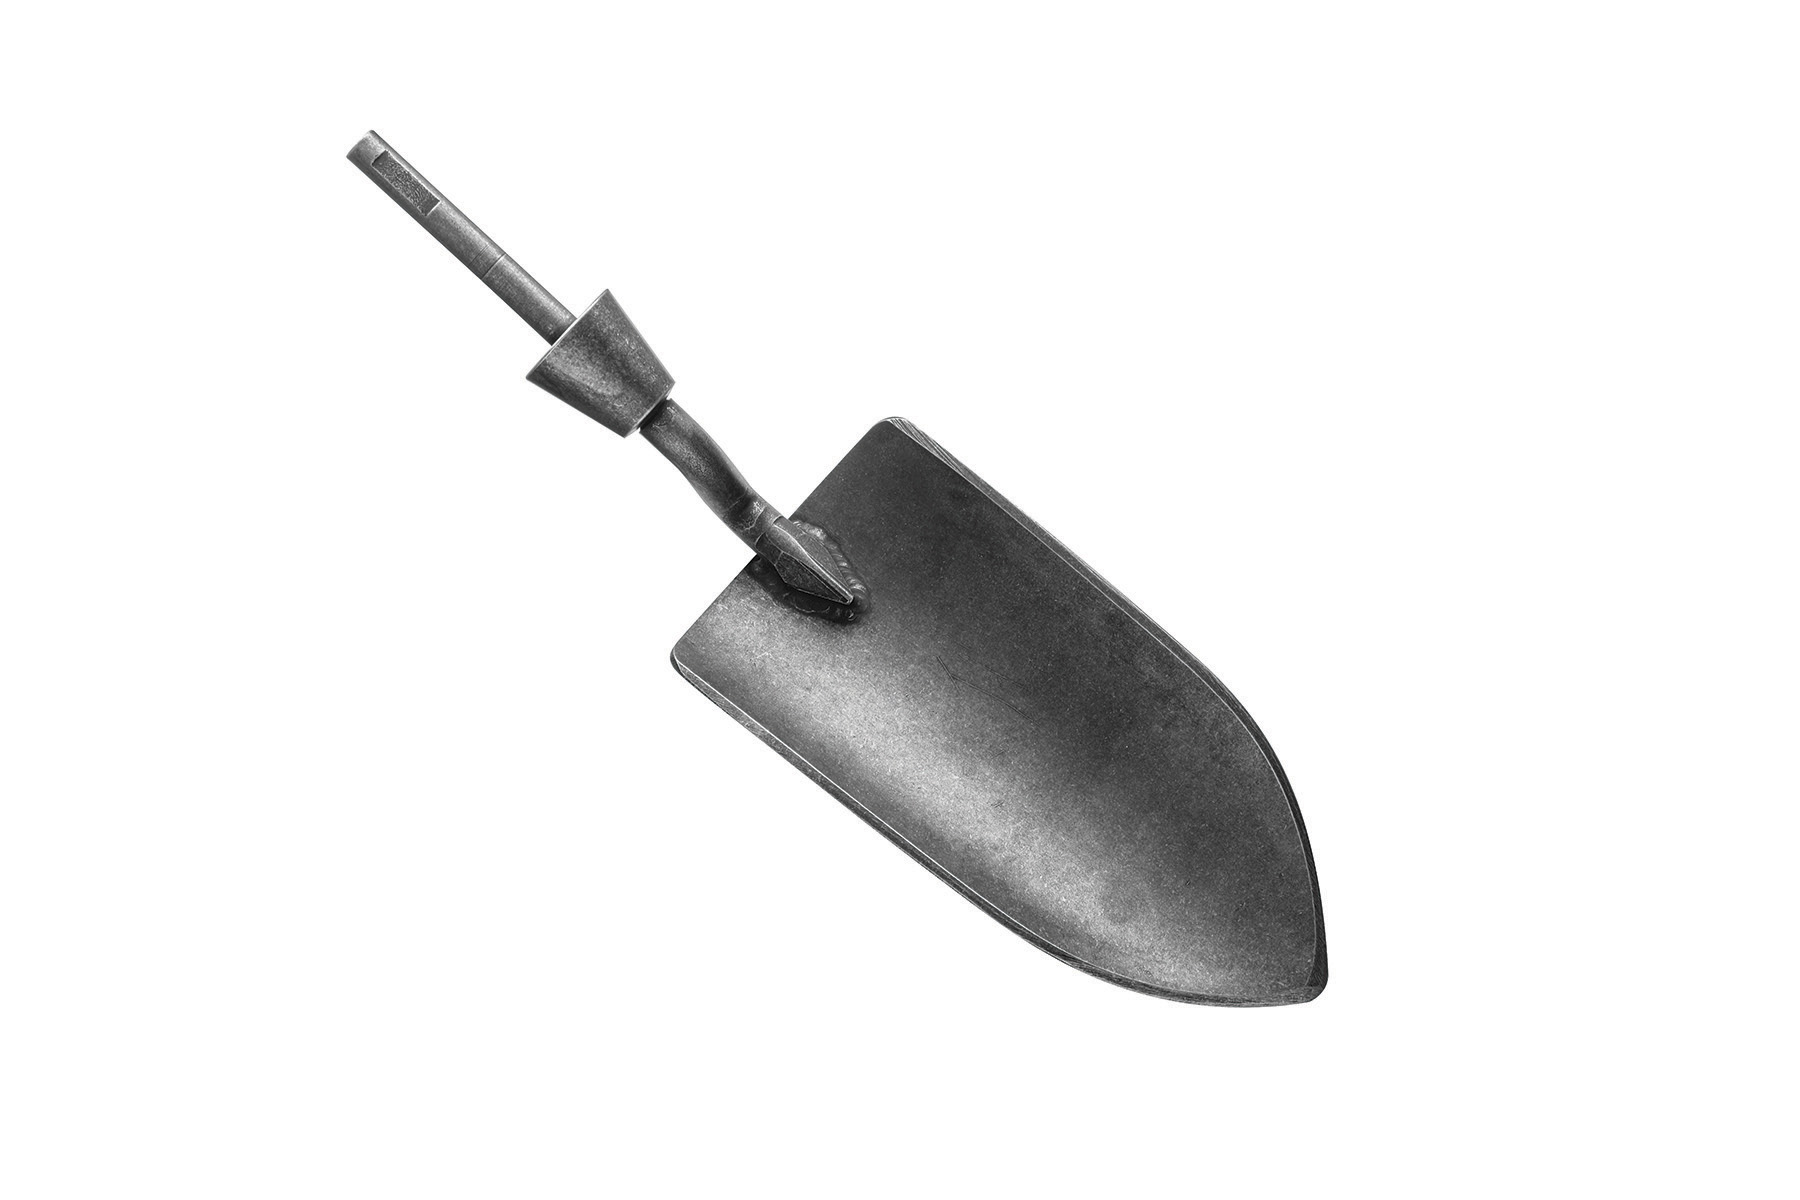 The Trowel has a curved 2-3/4'' wide blade—ideal for general digging and planting, and rooting out difficult weeds